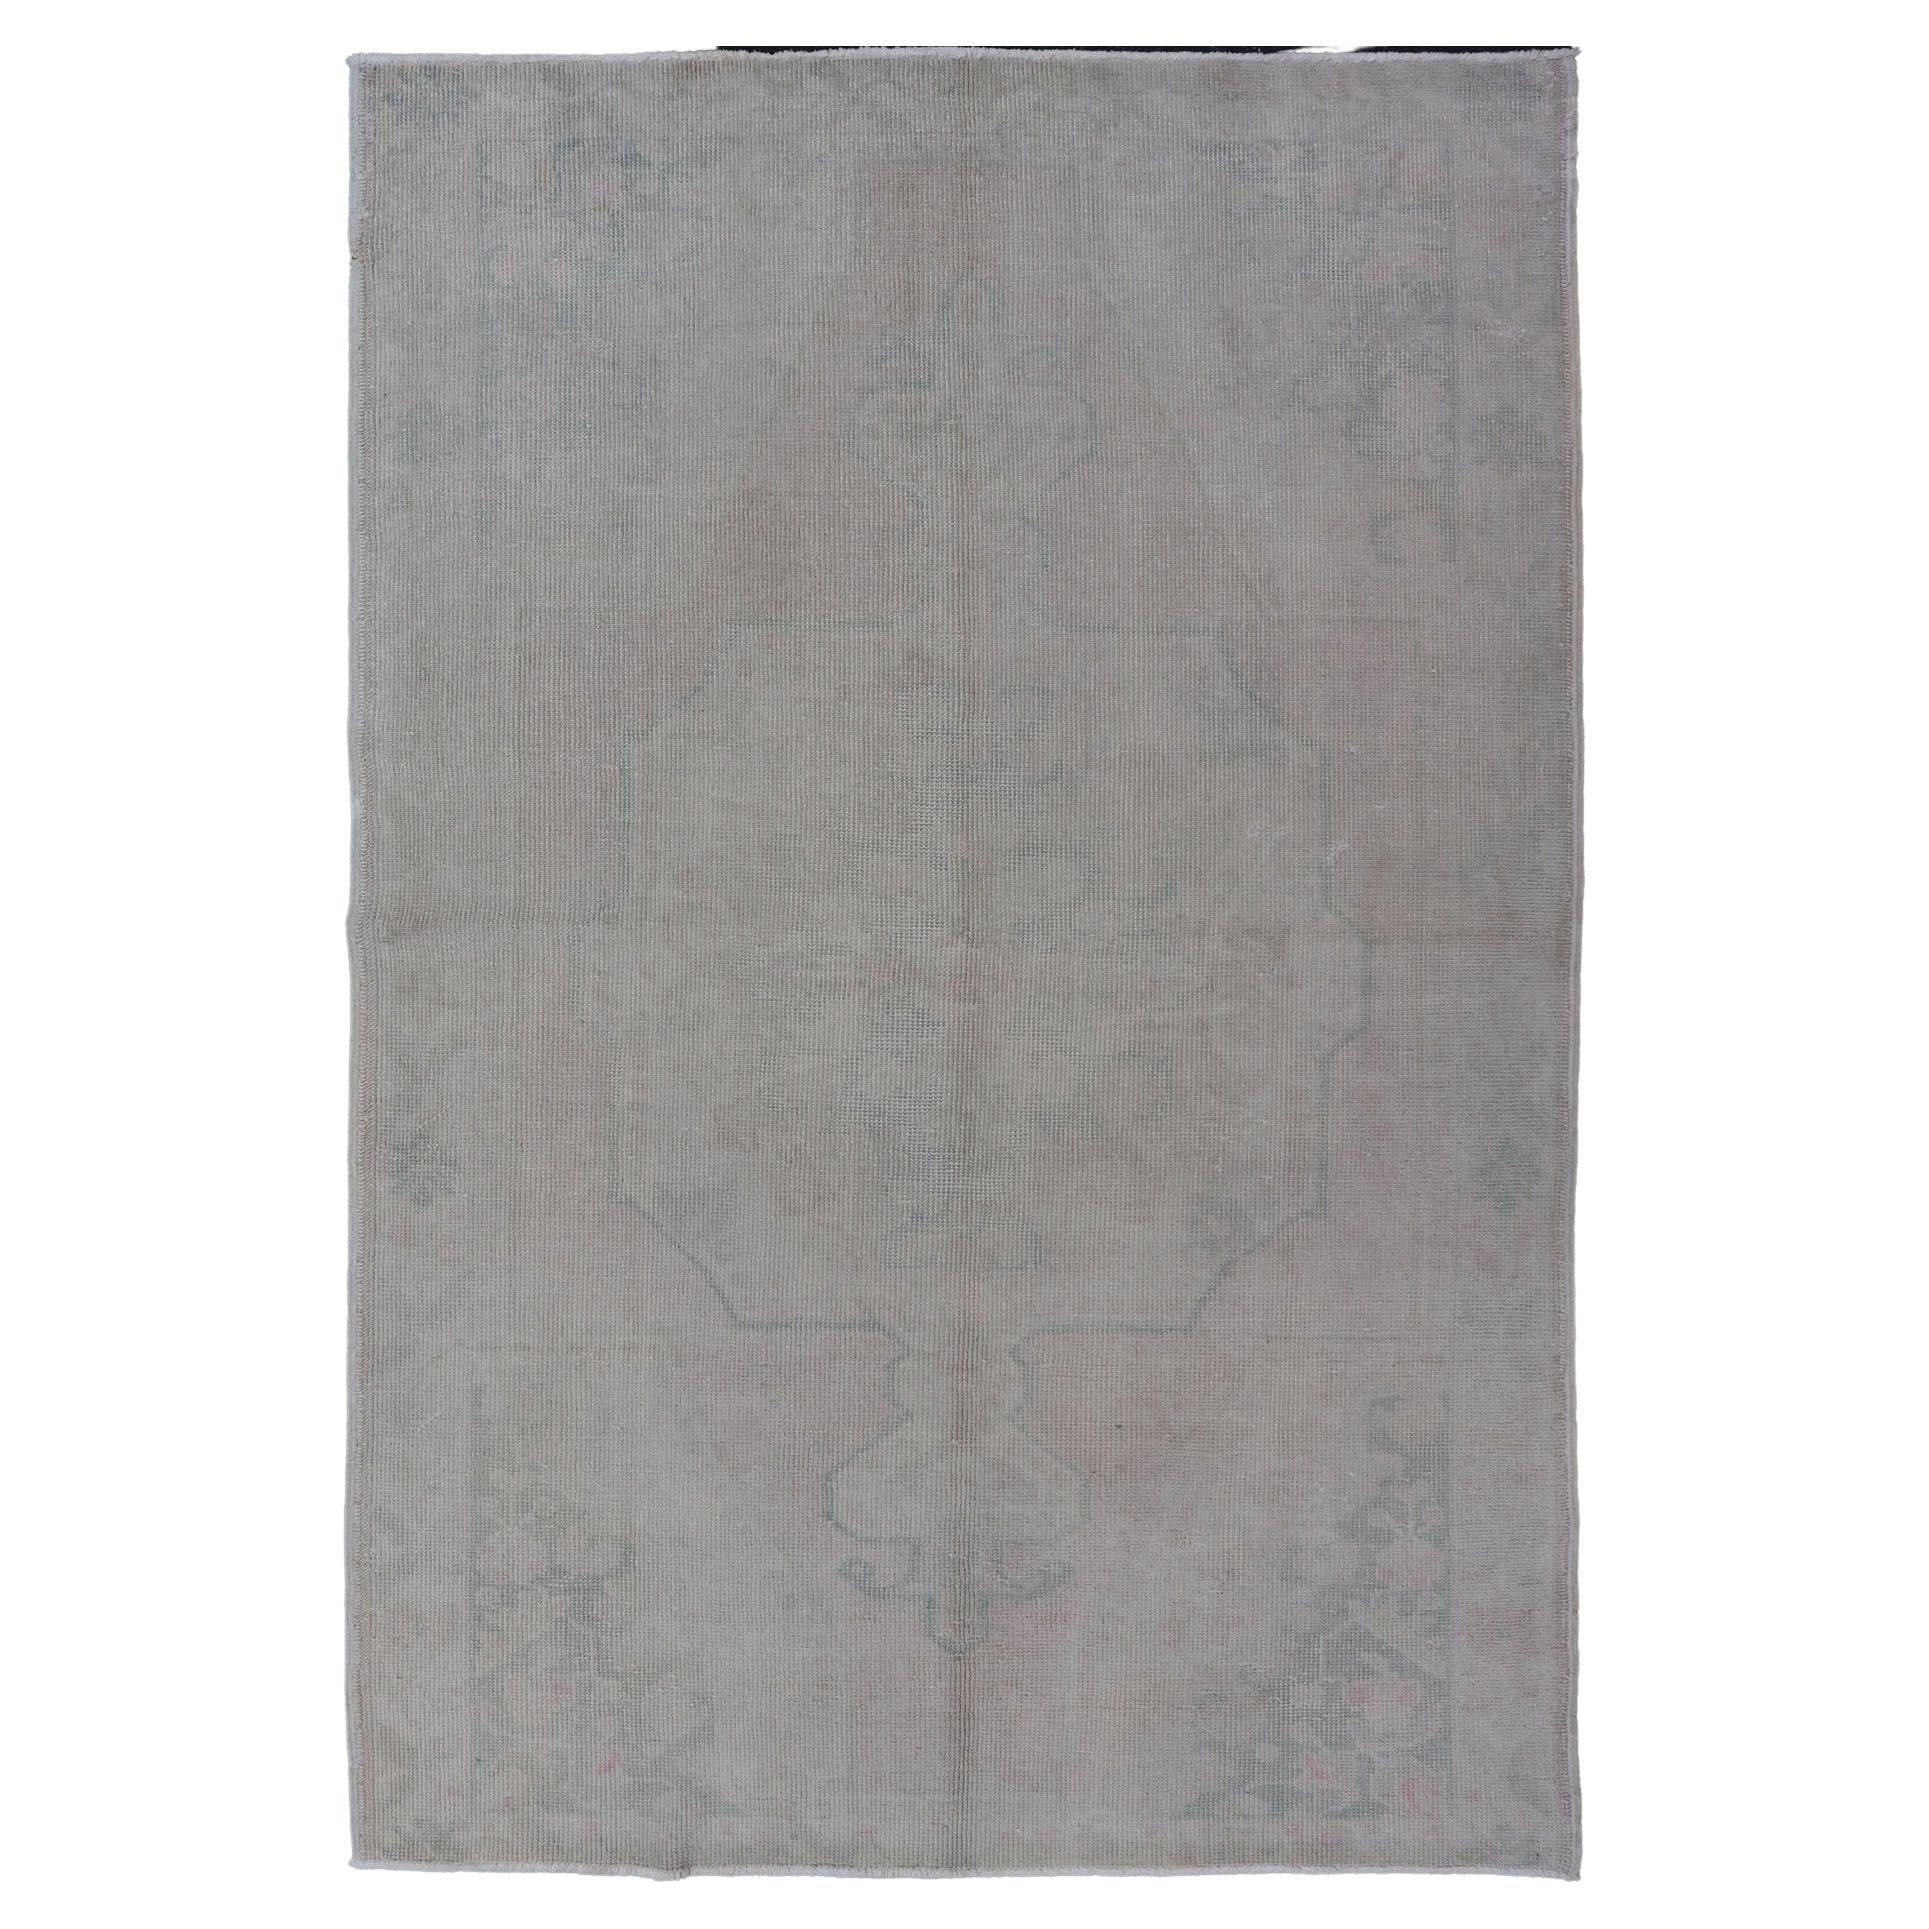 Vintage Turkish Medallion Oushak with All-Over Muted Tones of Neutral Colors